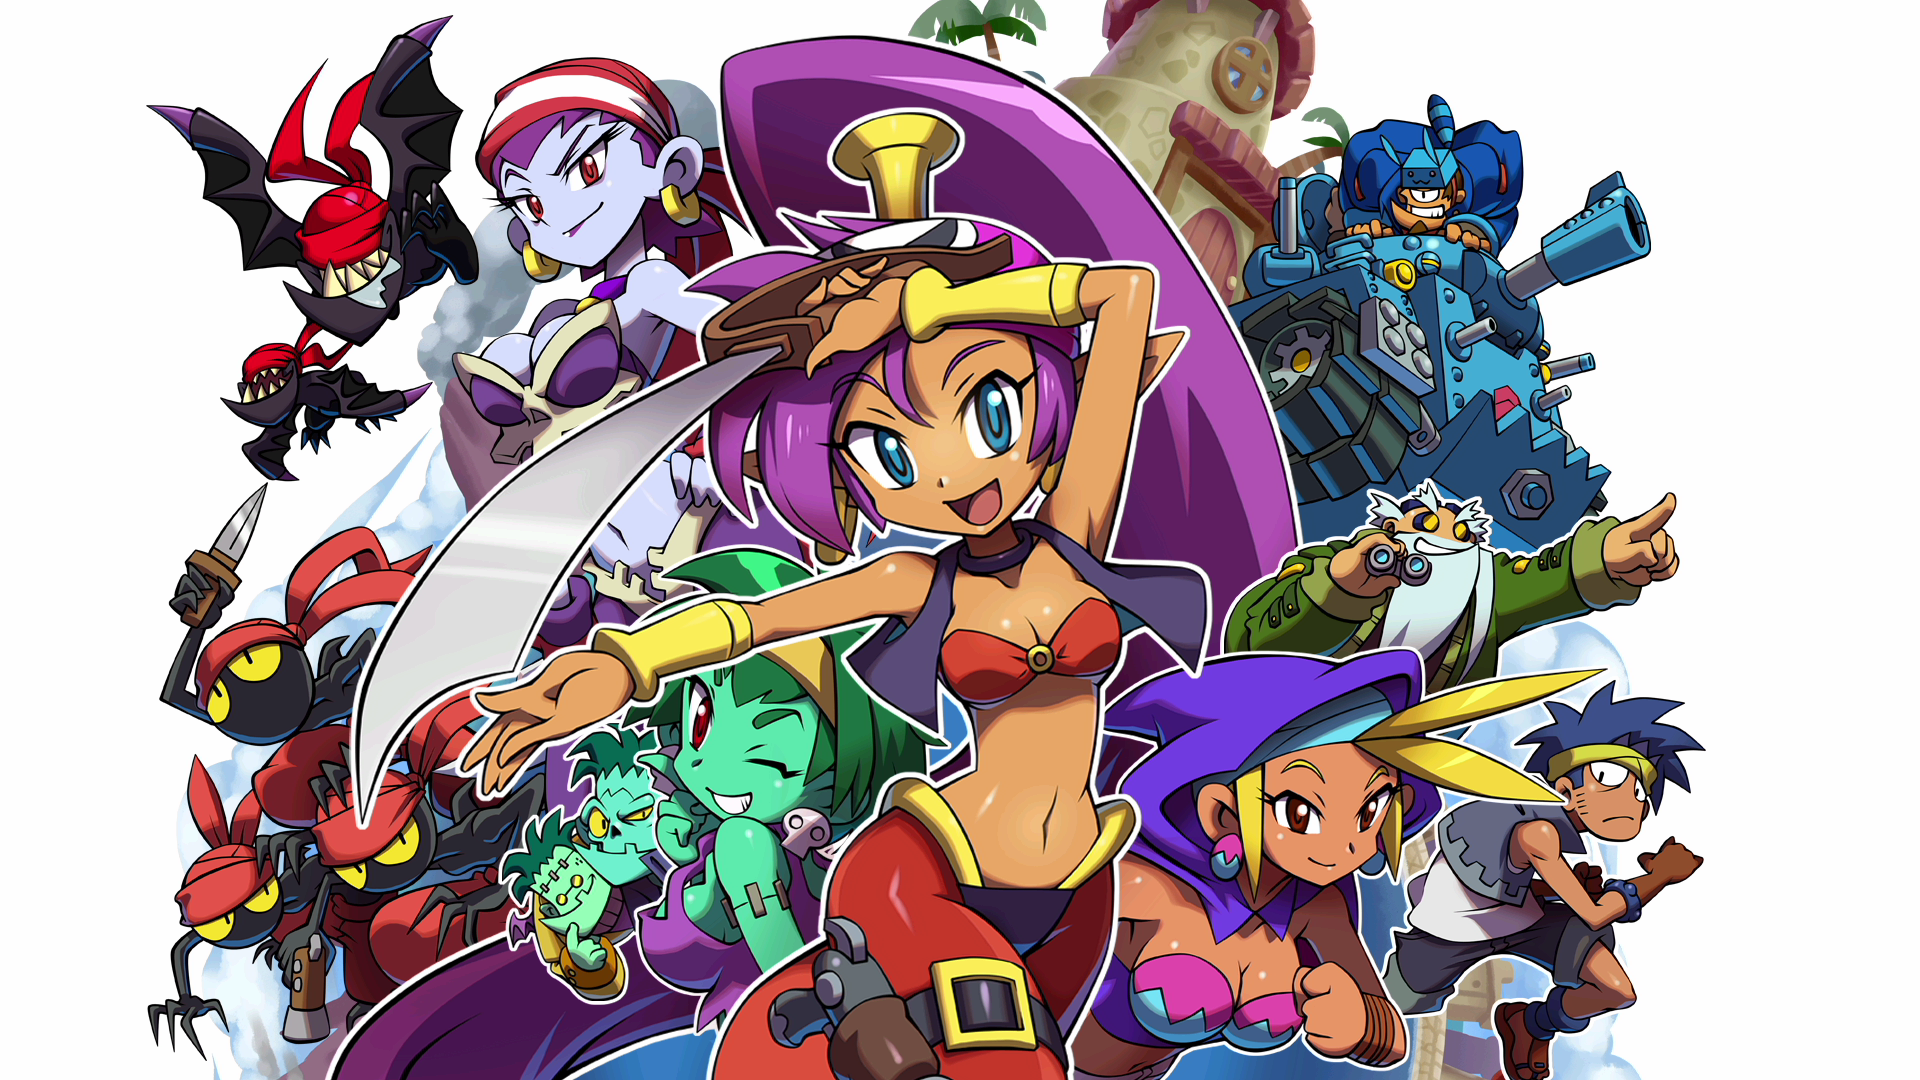 Shantae And The Pirate's Curse Backgrounds, Compatible - PC, Mobile, Gadgets| 1920x1080 px